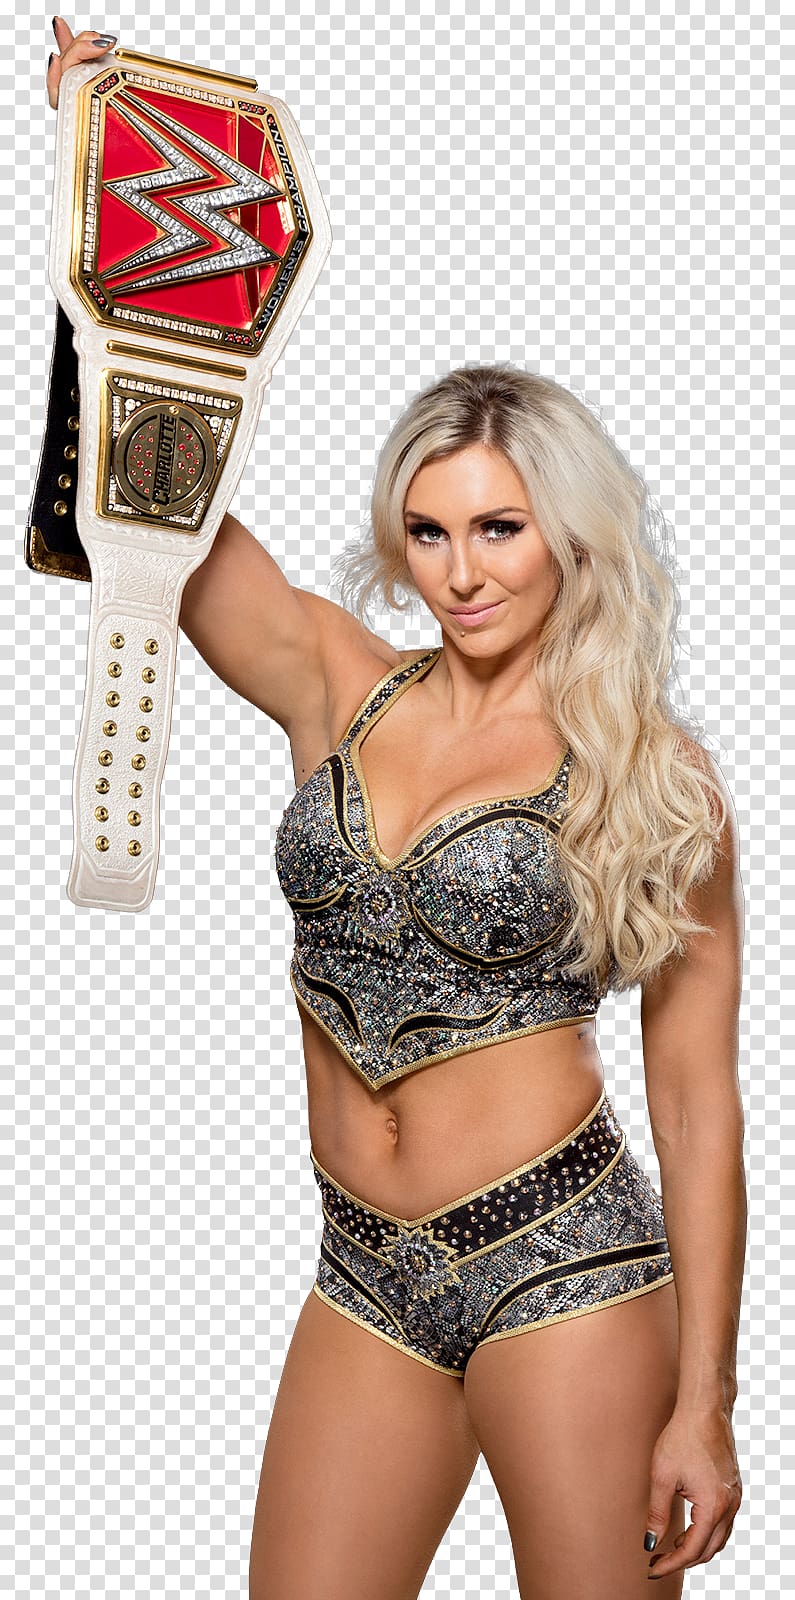 Charlotte Flair Money in the Bank ladder match WWE SmackDown Women\'s Championship WWE Raw Women\'s Championship, wwe transparent background PNG clipart